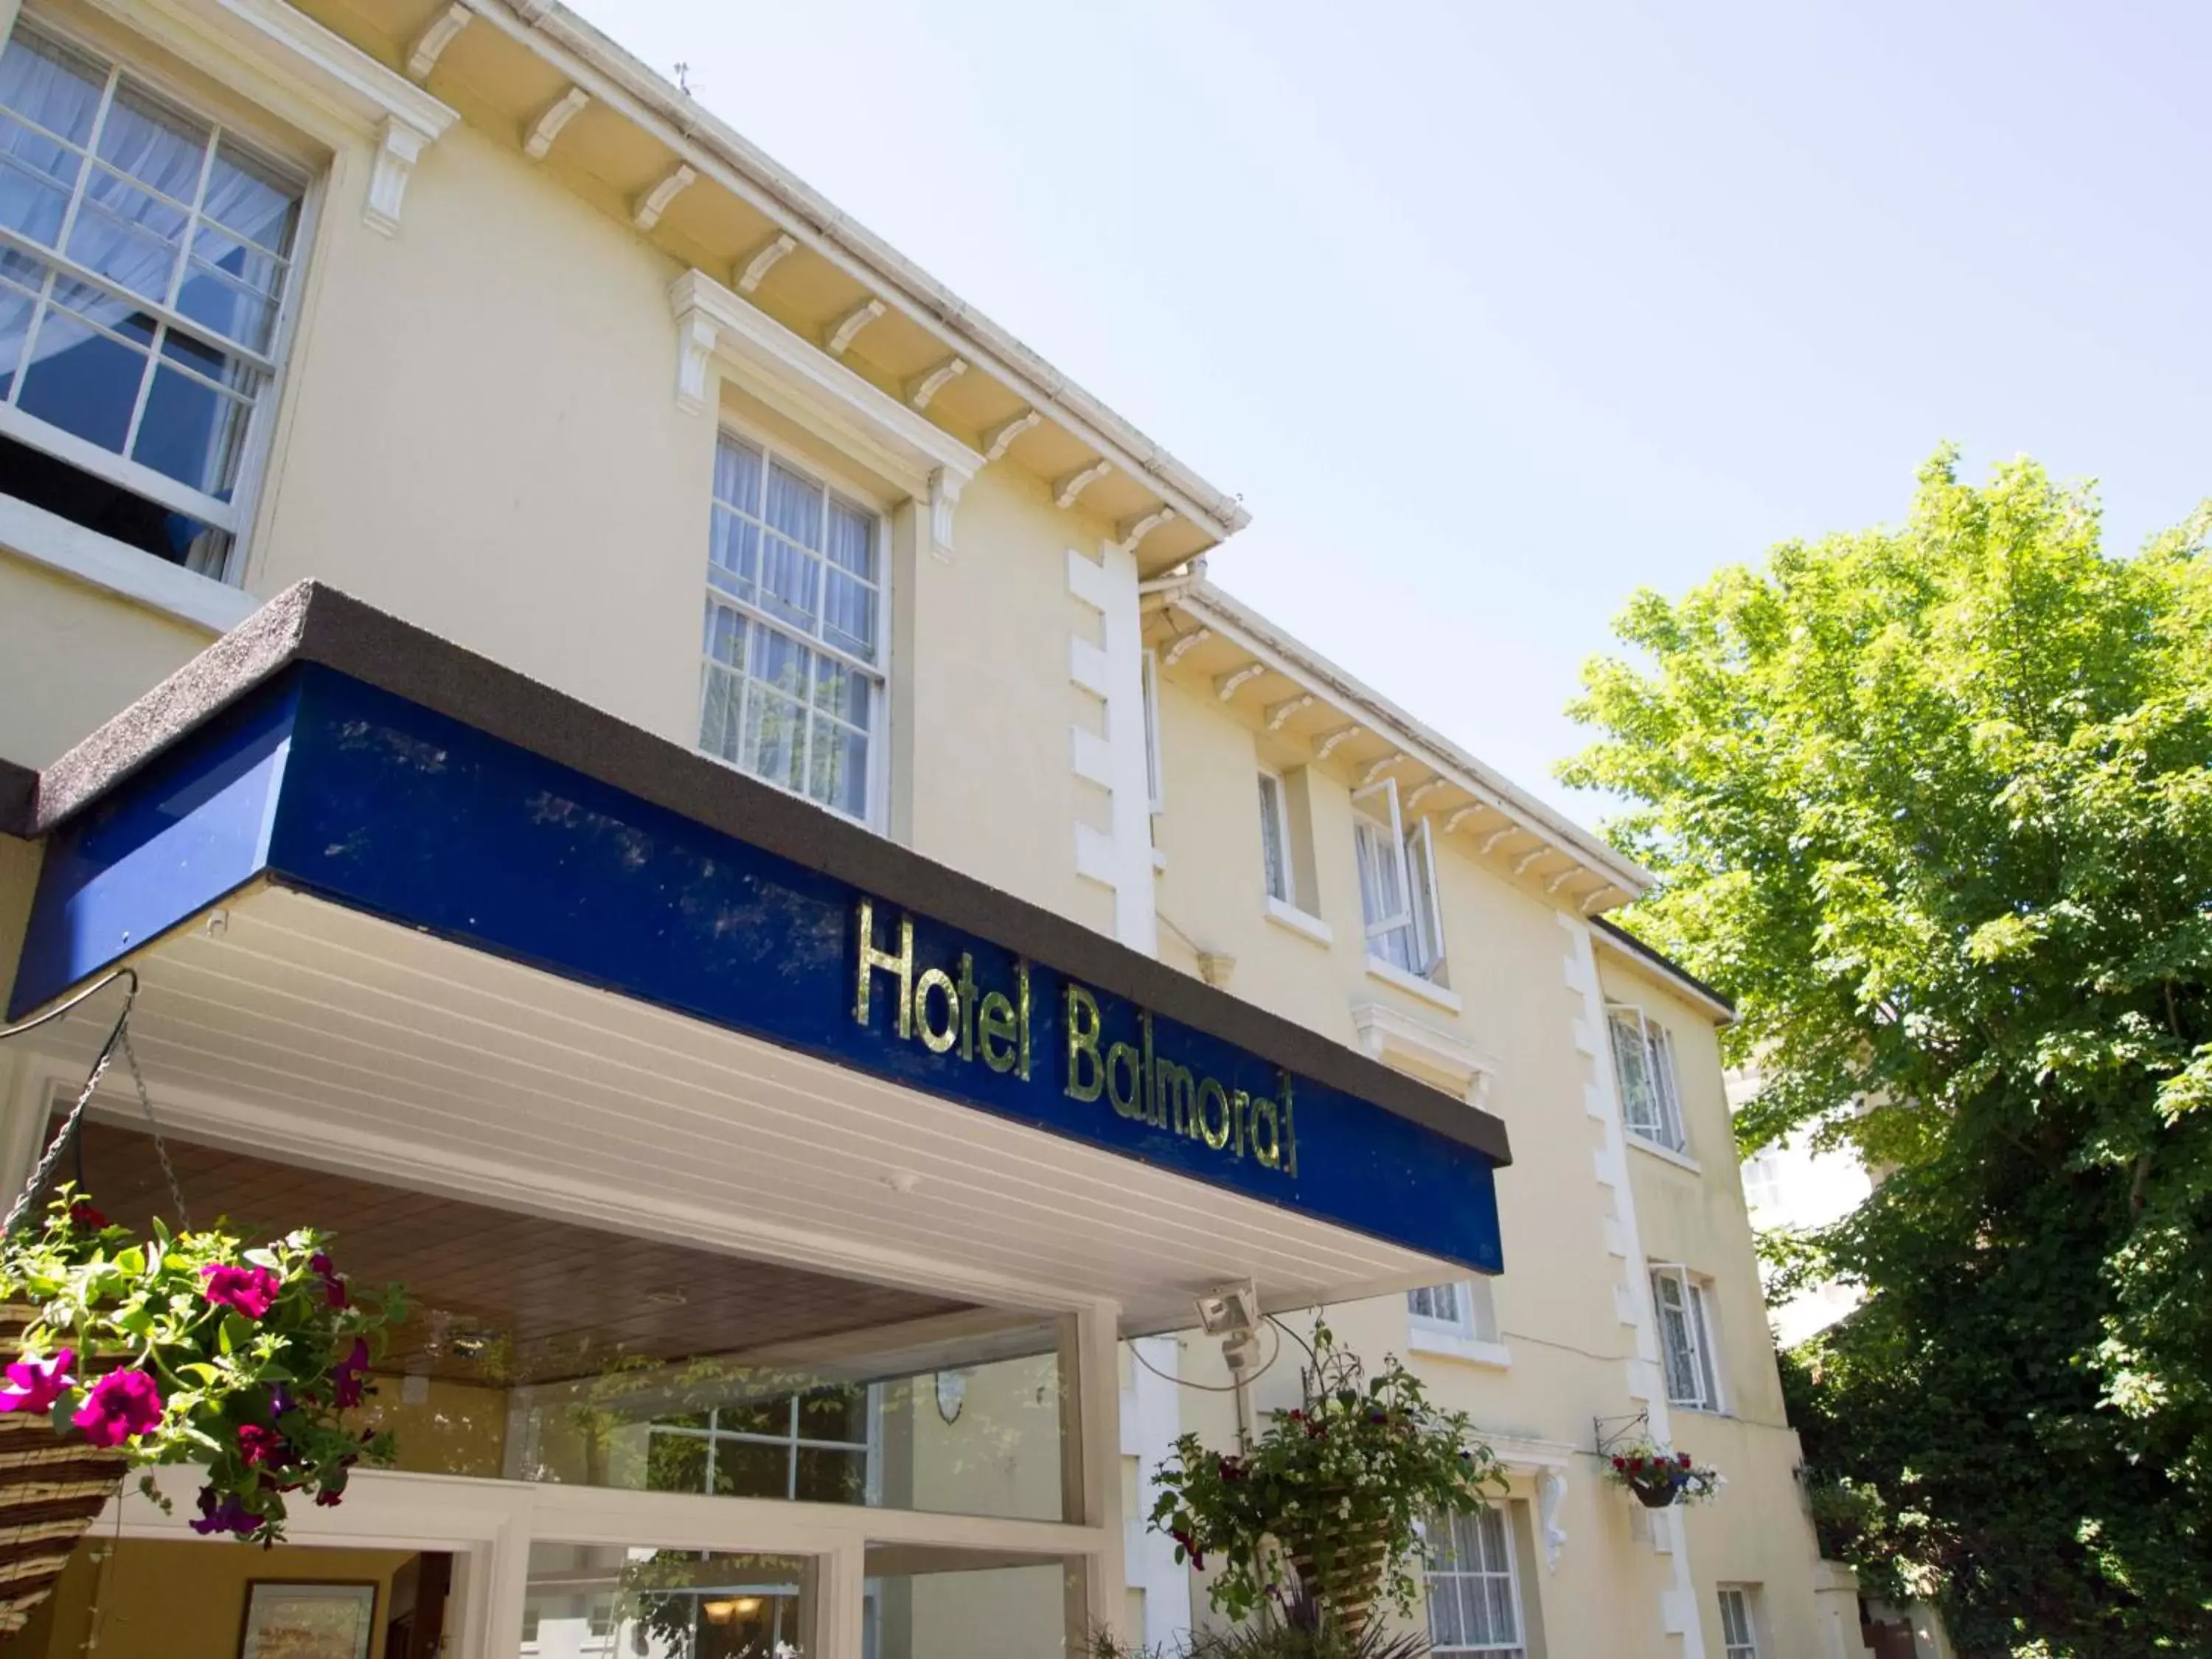 Property Building in The Hotel Balmoral - Adults Only